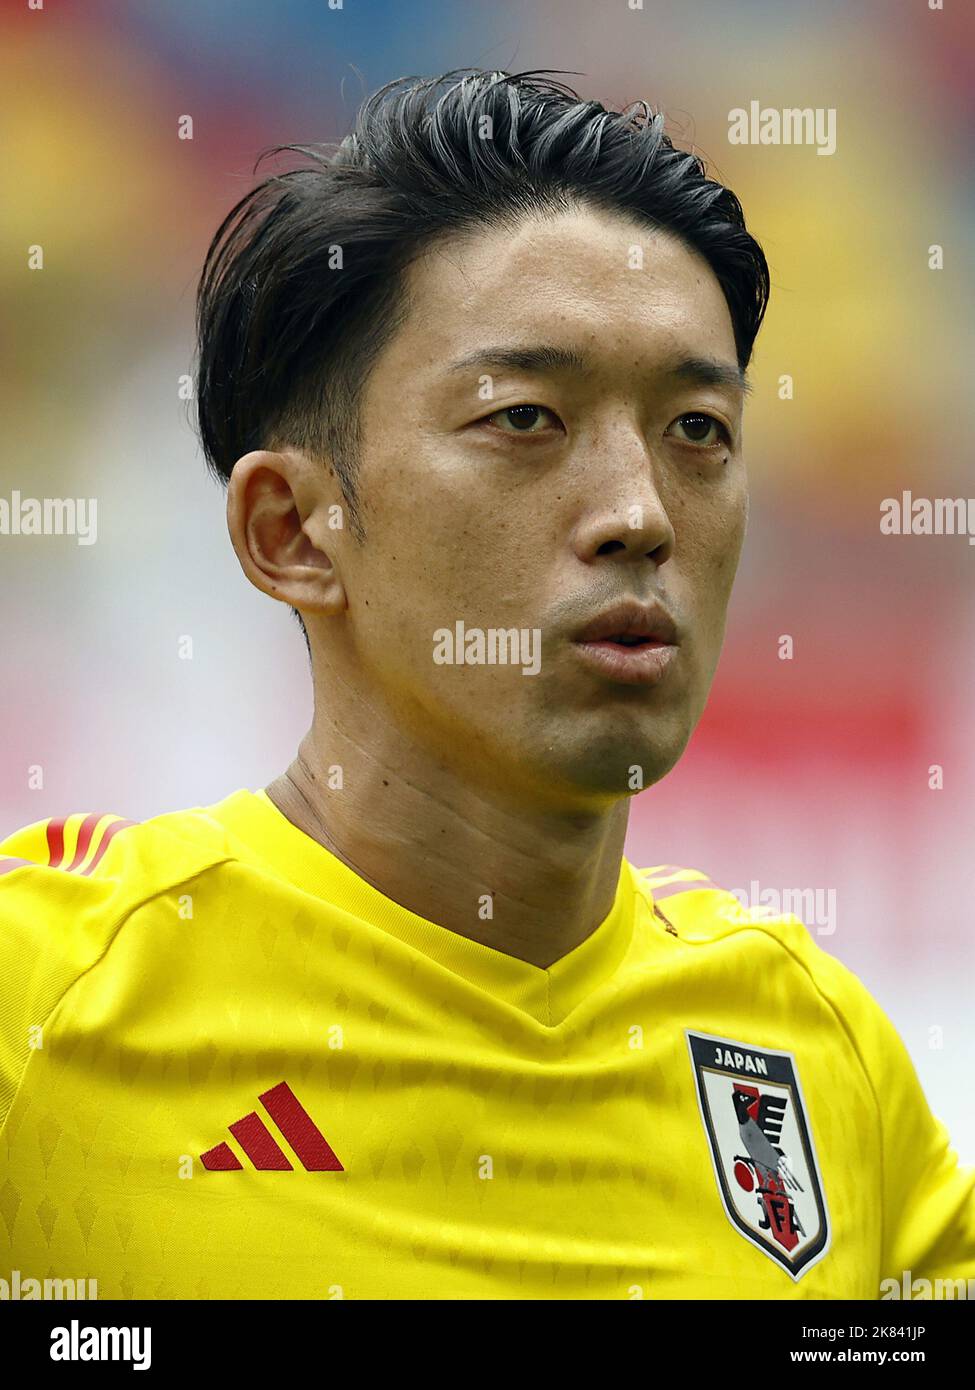 DUSSELDORF - Japan goalkeeper Shuichi Gonda during the International Friendly match between Japan and United States at the Dusseldorf Arena on September 23, 2022 in Dusseldorf, Germany. ANP | Dutch Height | Maurice van Steen Stock Photo